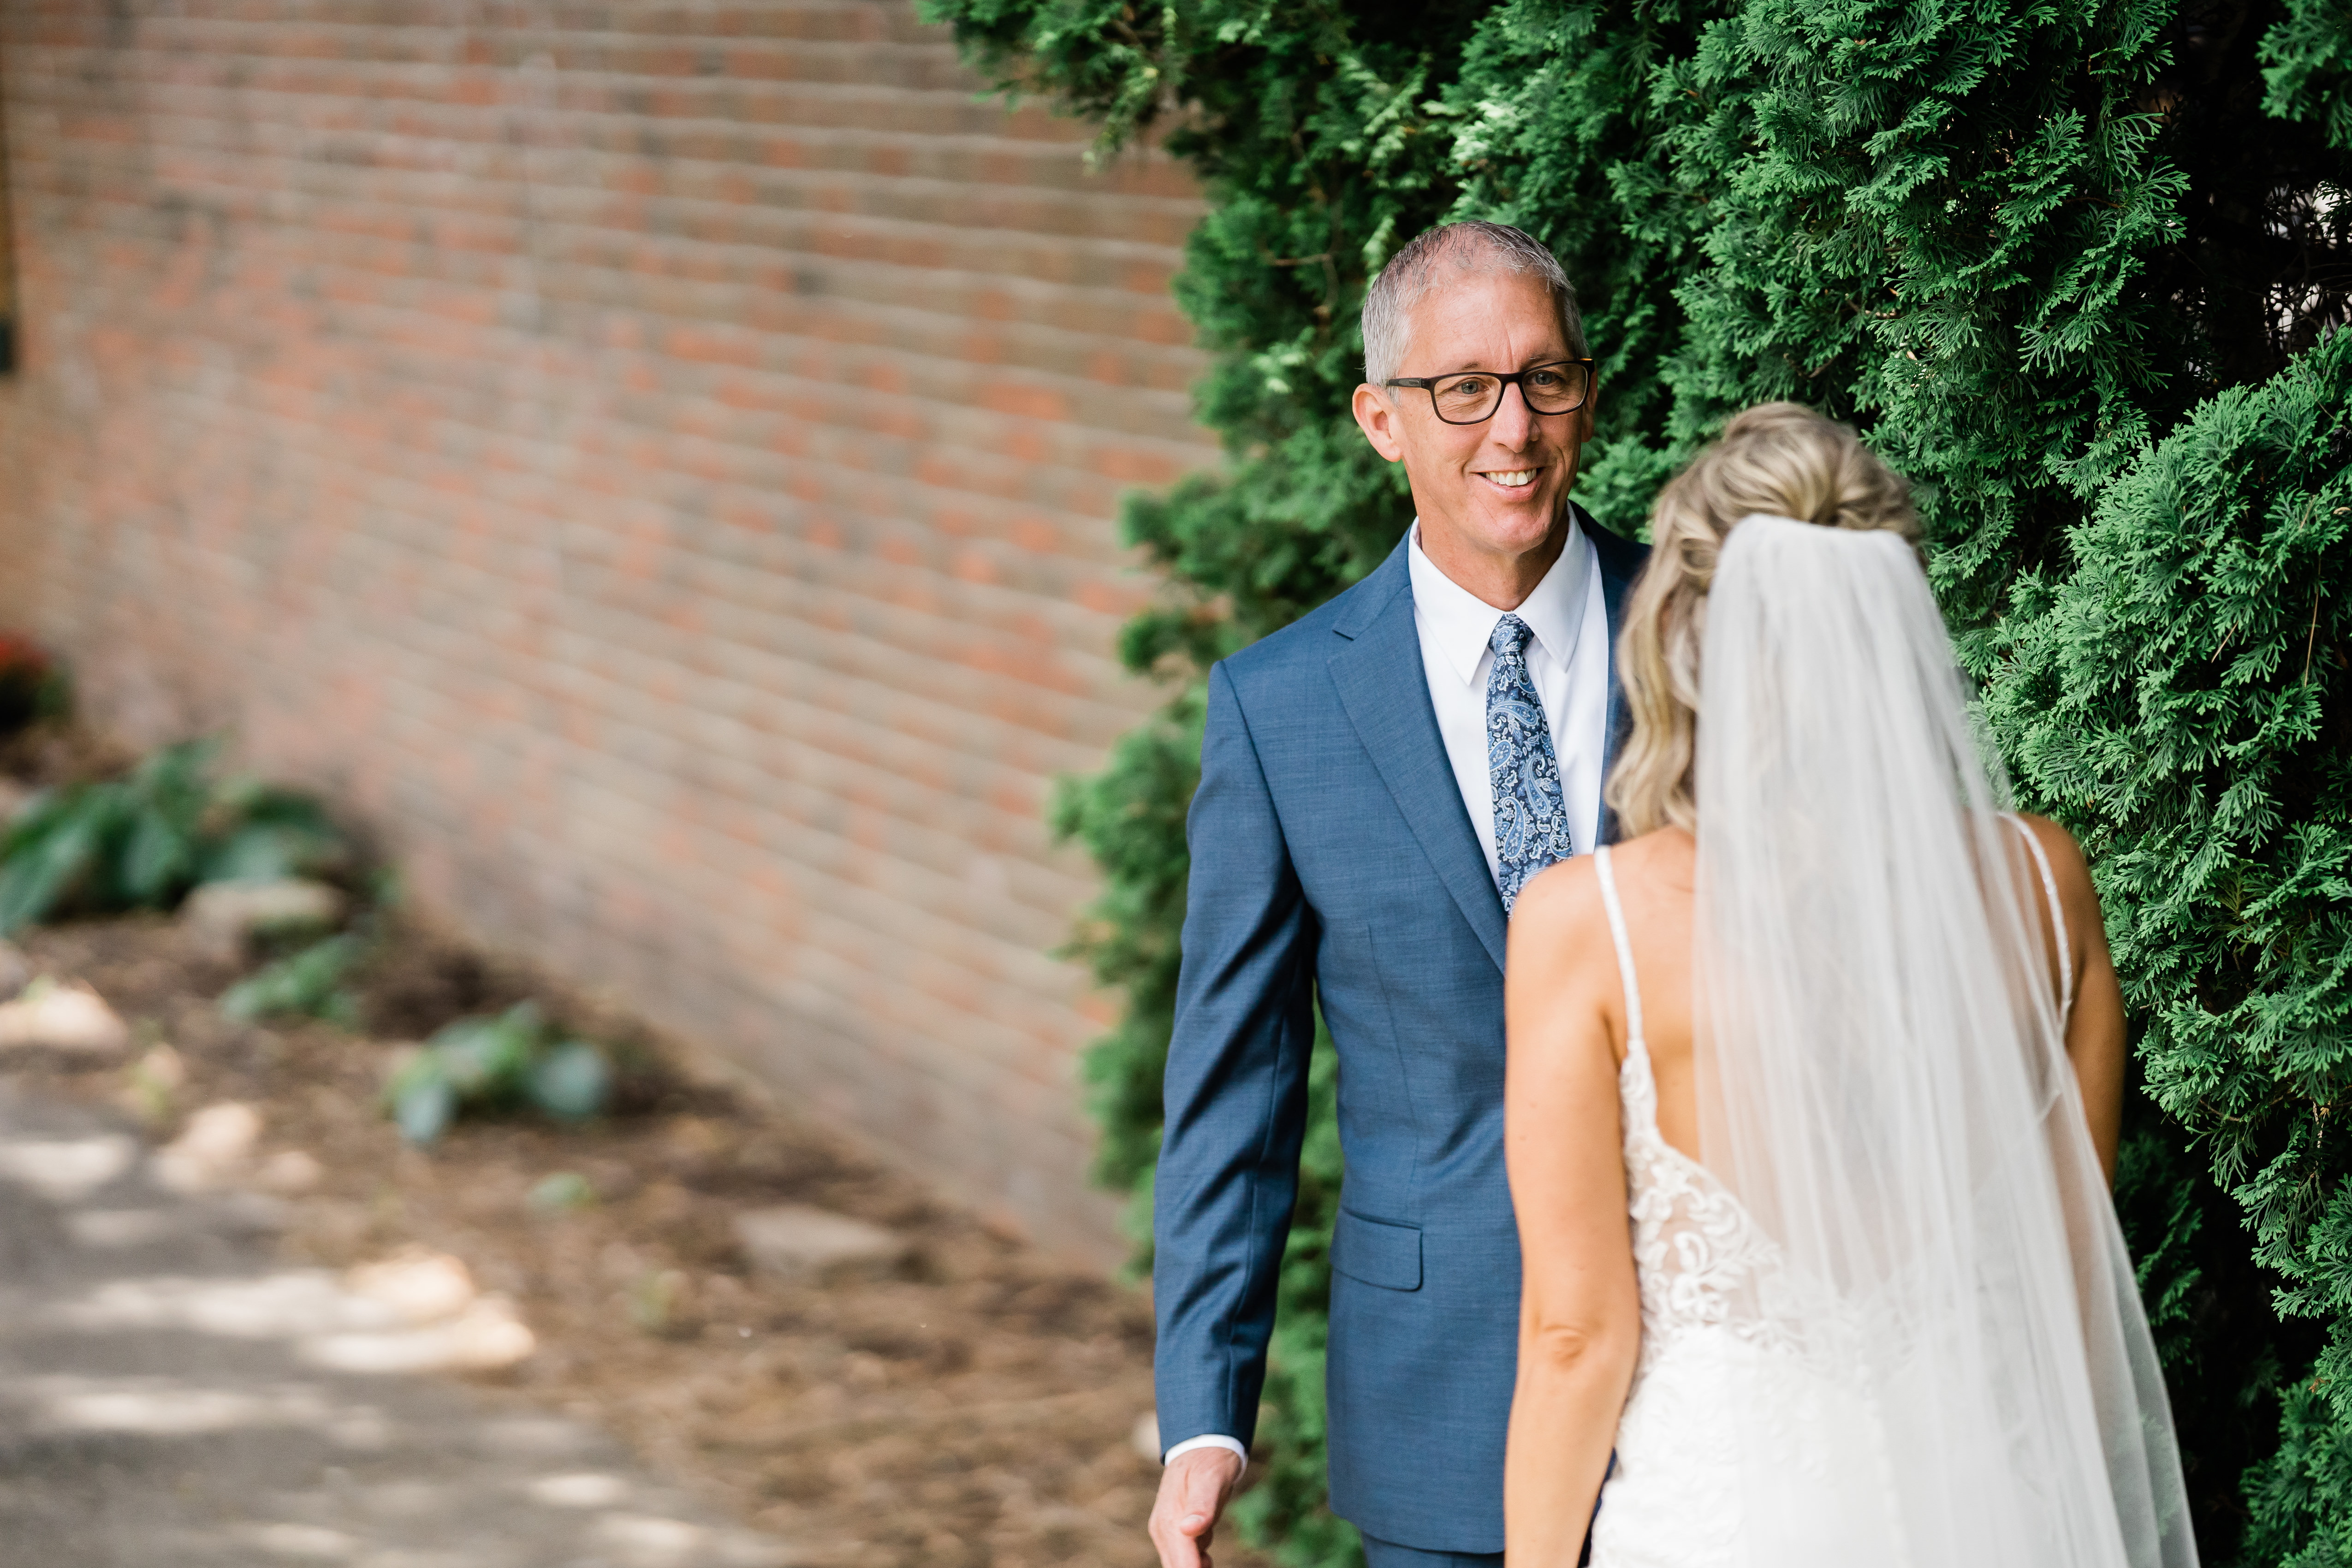 Fort Wayne wedding photographer captures father of bride seeing bride in wedding gown for first time